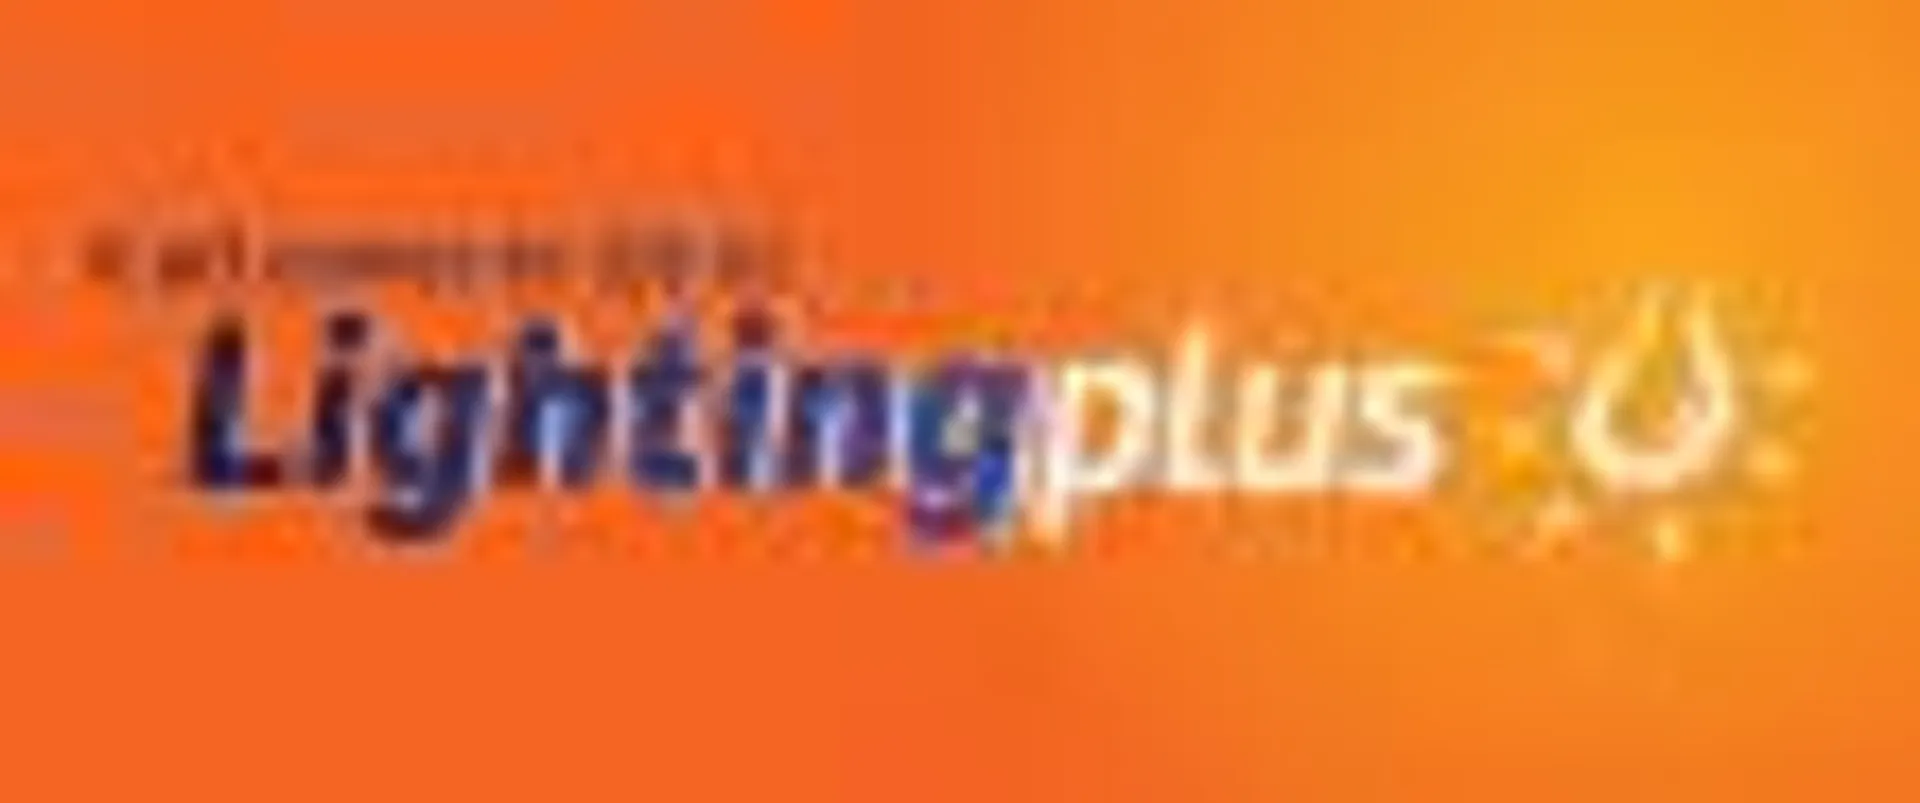 LIGHTING PLUS logo current weekly ad